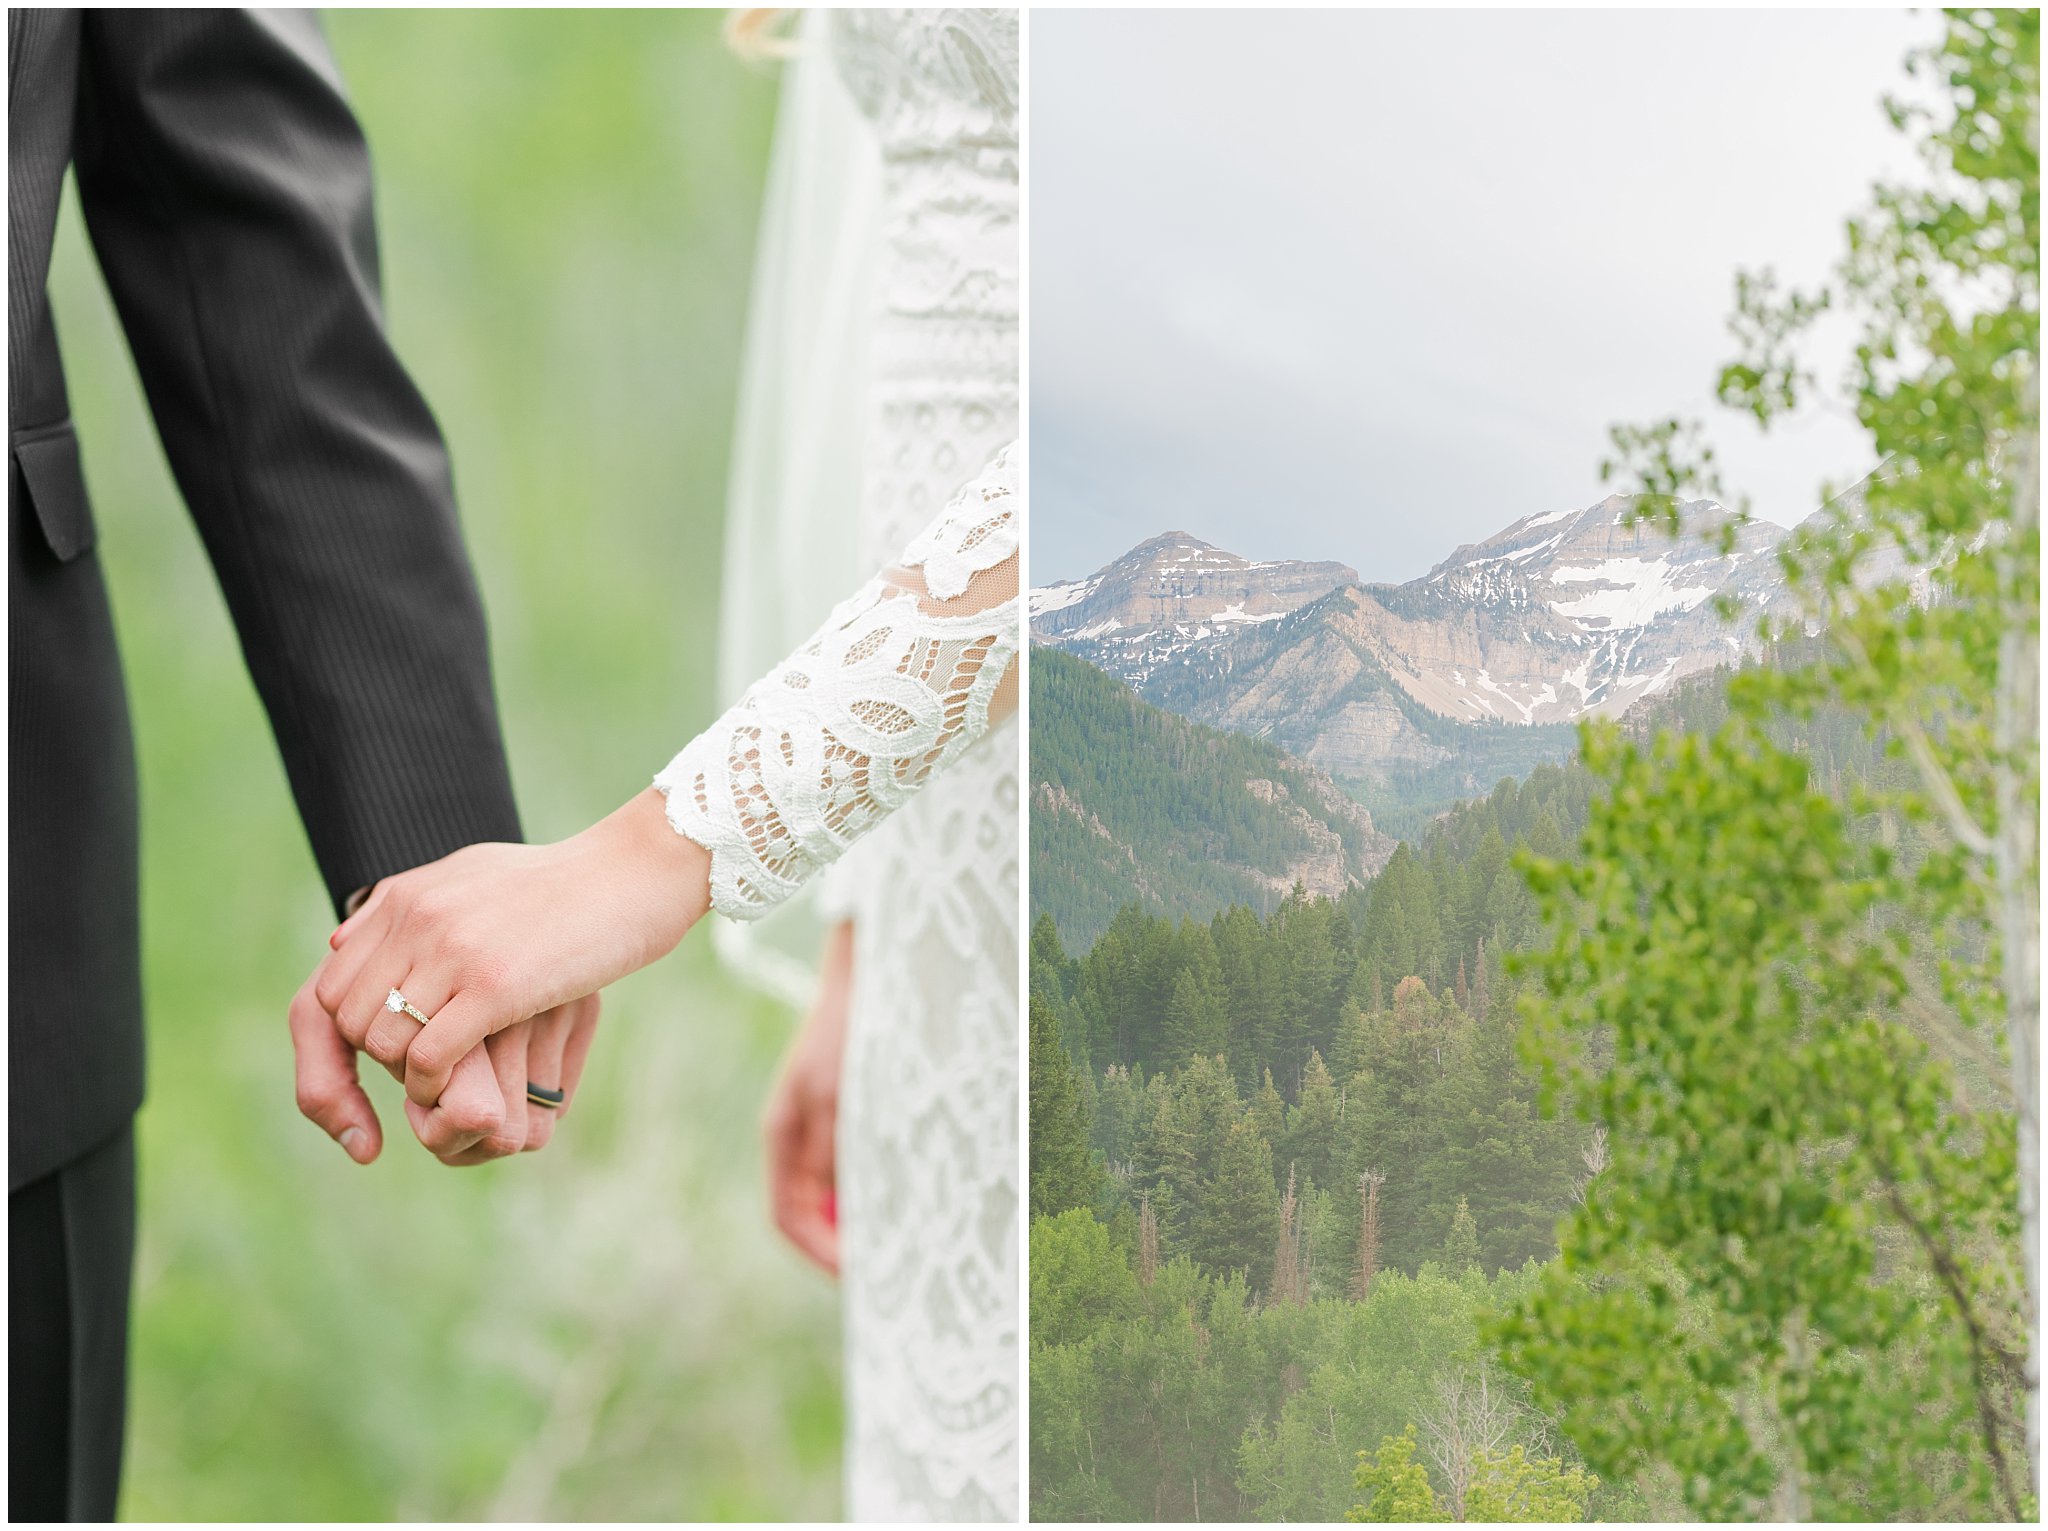 Candid photos of bride in lace dress and groom in black suit with deep pink and white floral bouquet | Utah Mountain Wedding Formal Session | Tibble Fork Summer Formal Session | Jessie and Dallin Photography